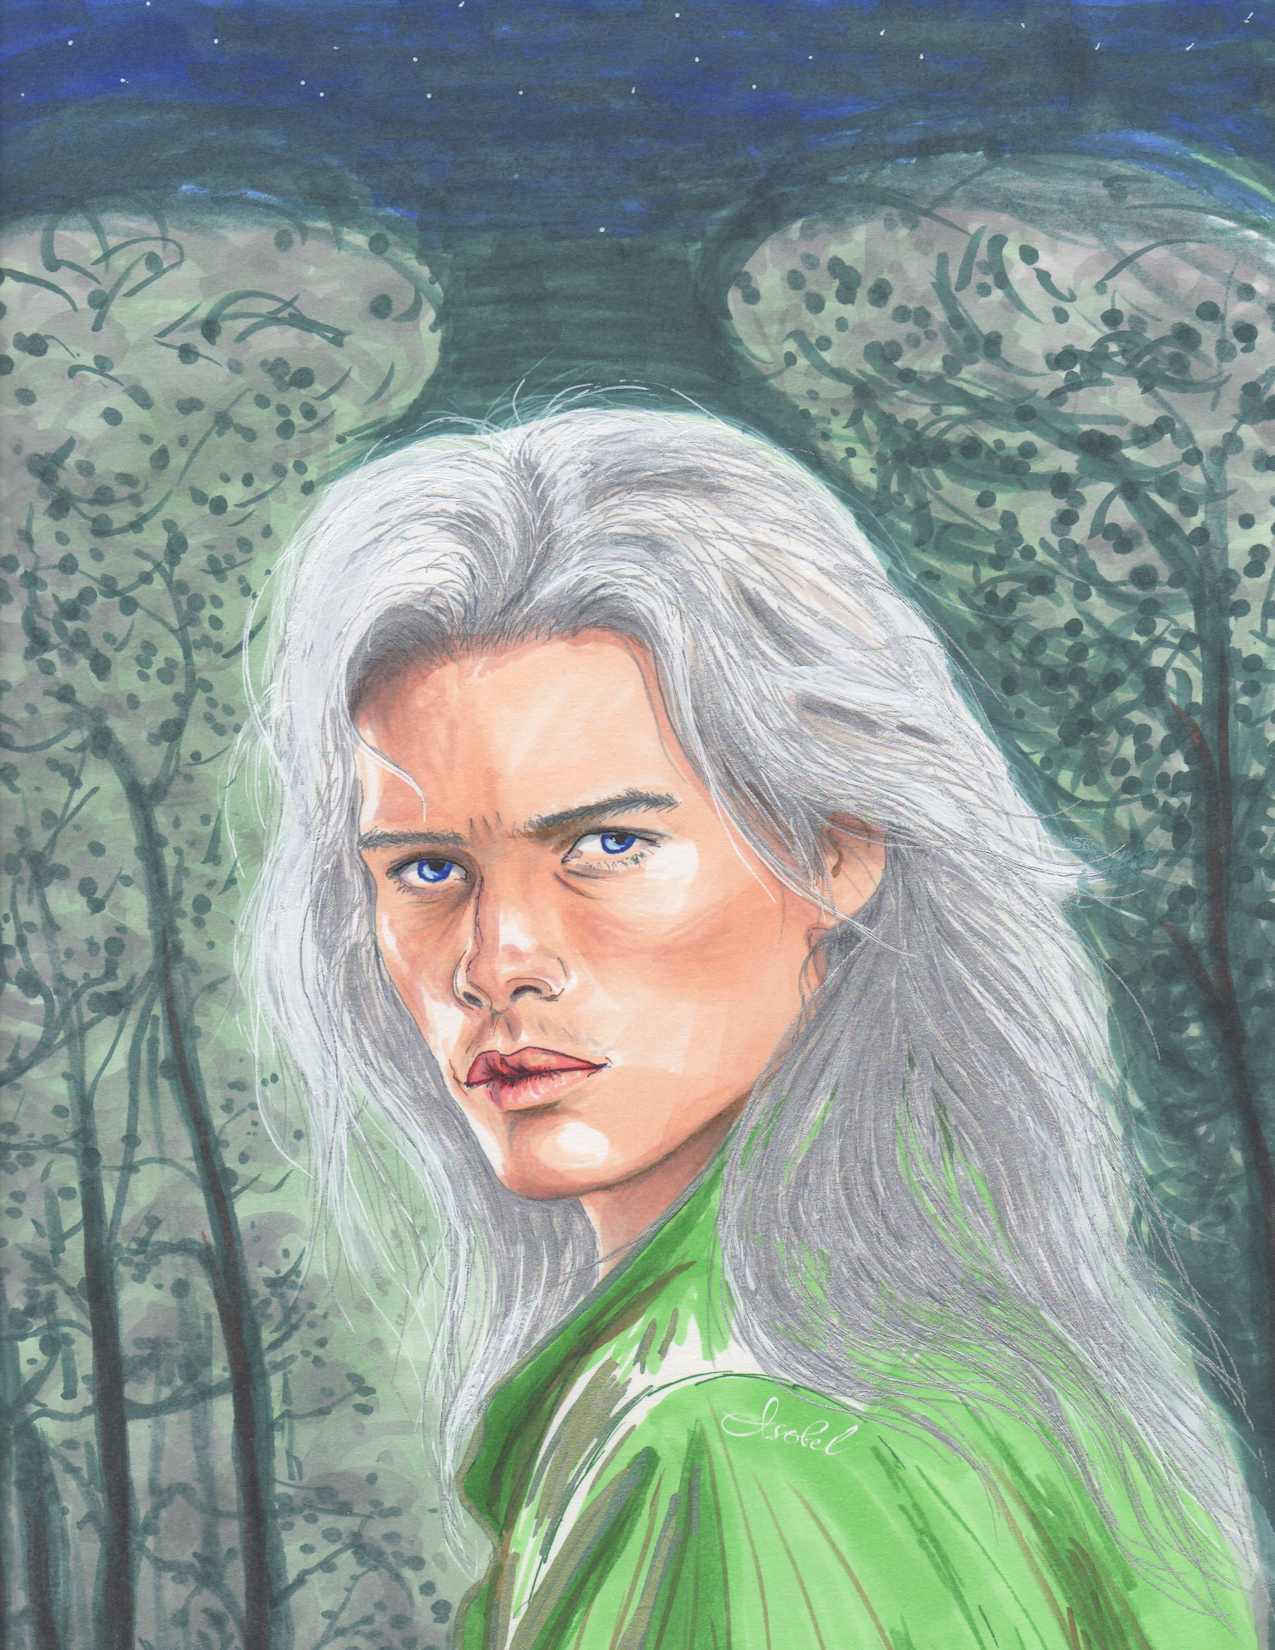 drawing of a man with white hair on the background of trees, signed by Isobel